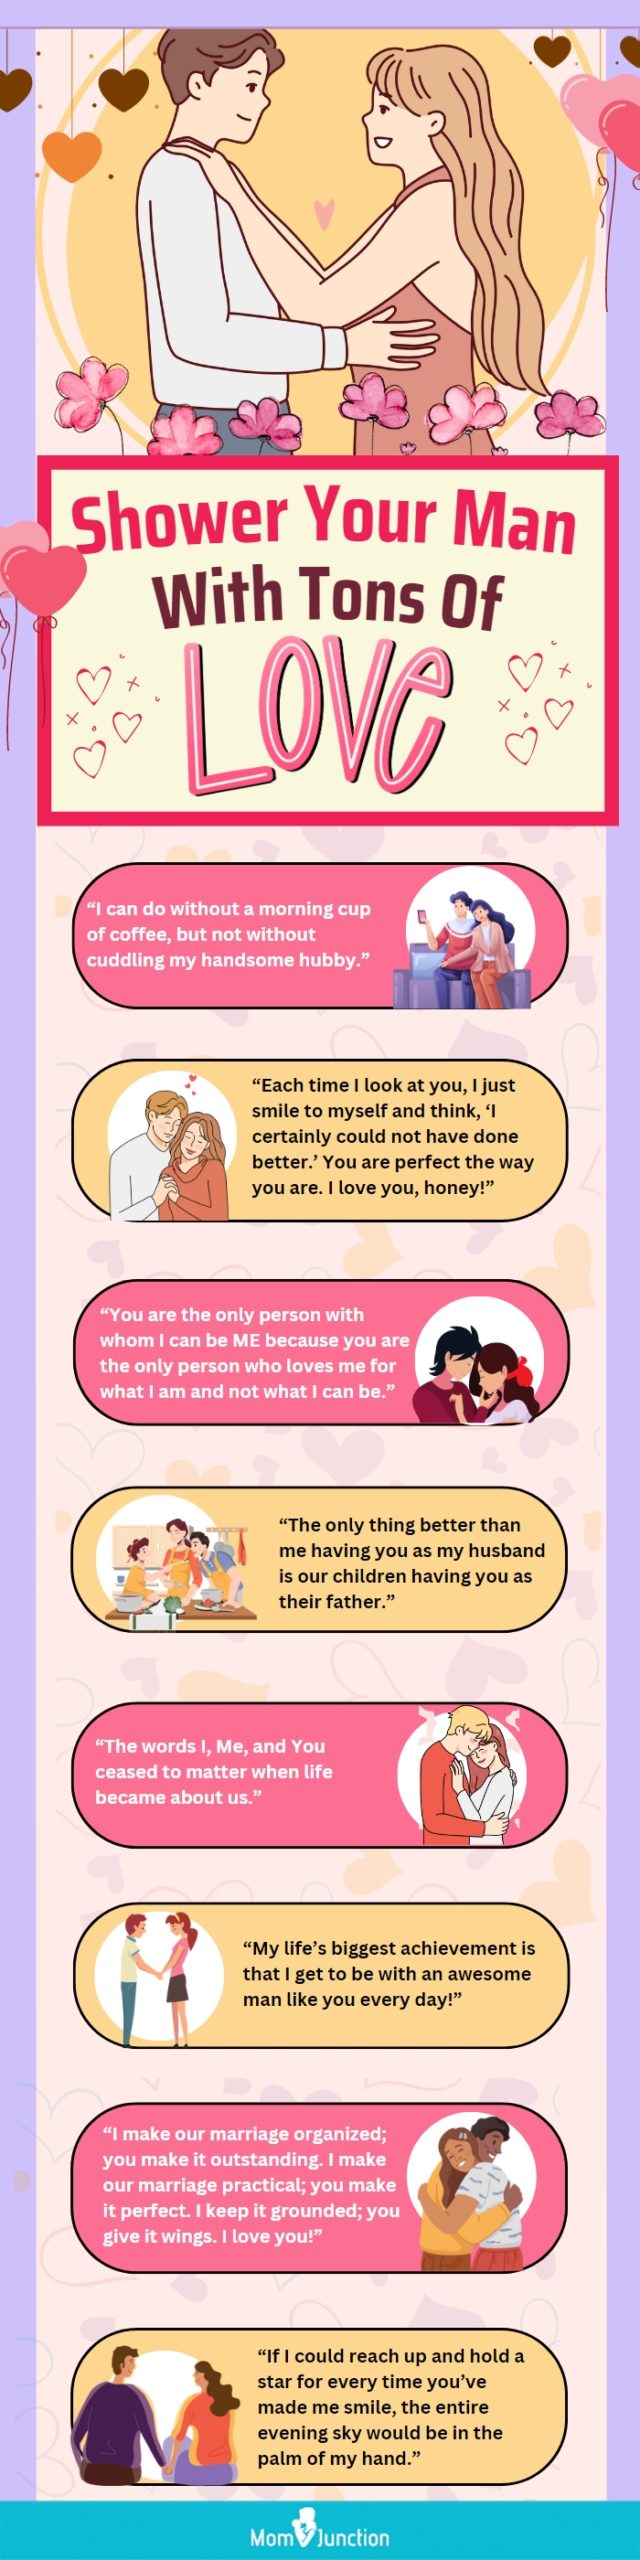 love quotes for husband [infographic]